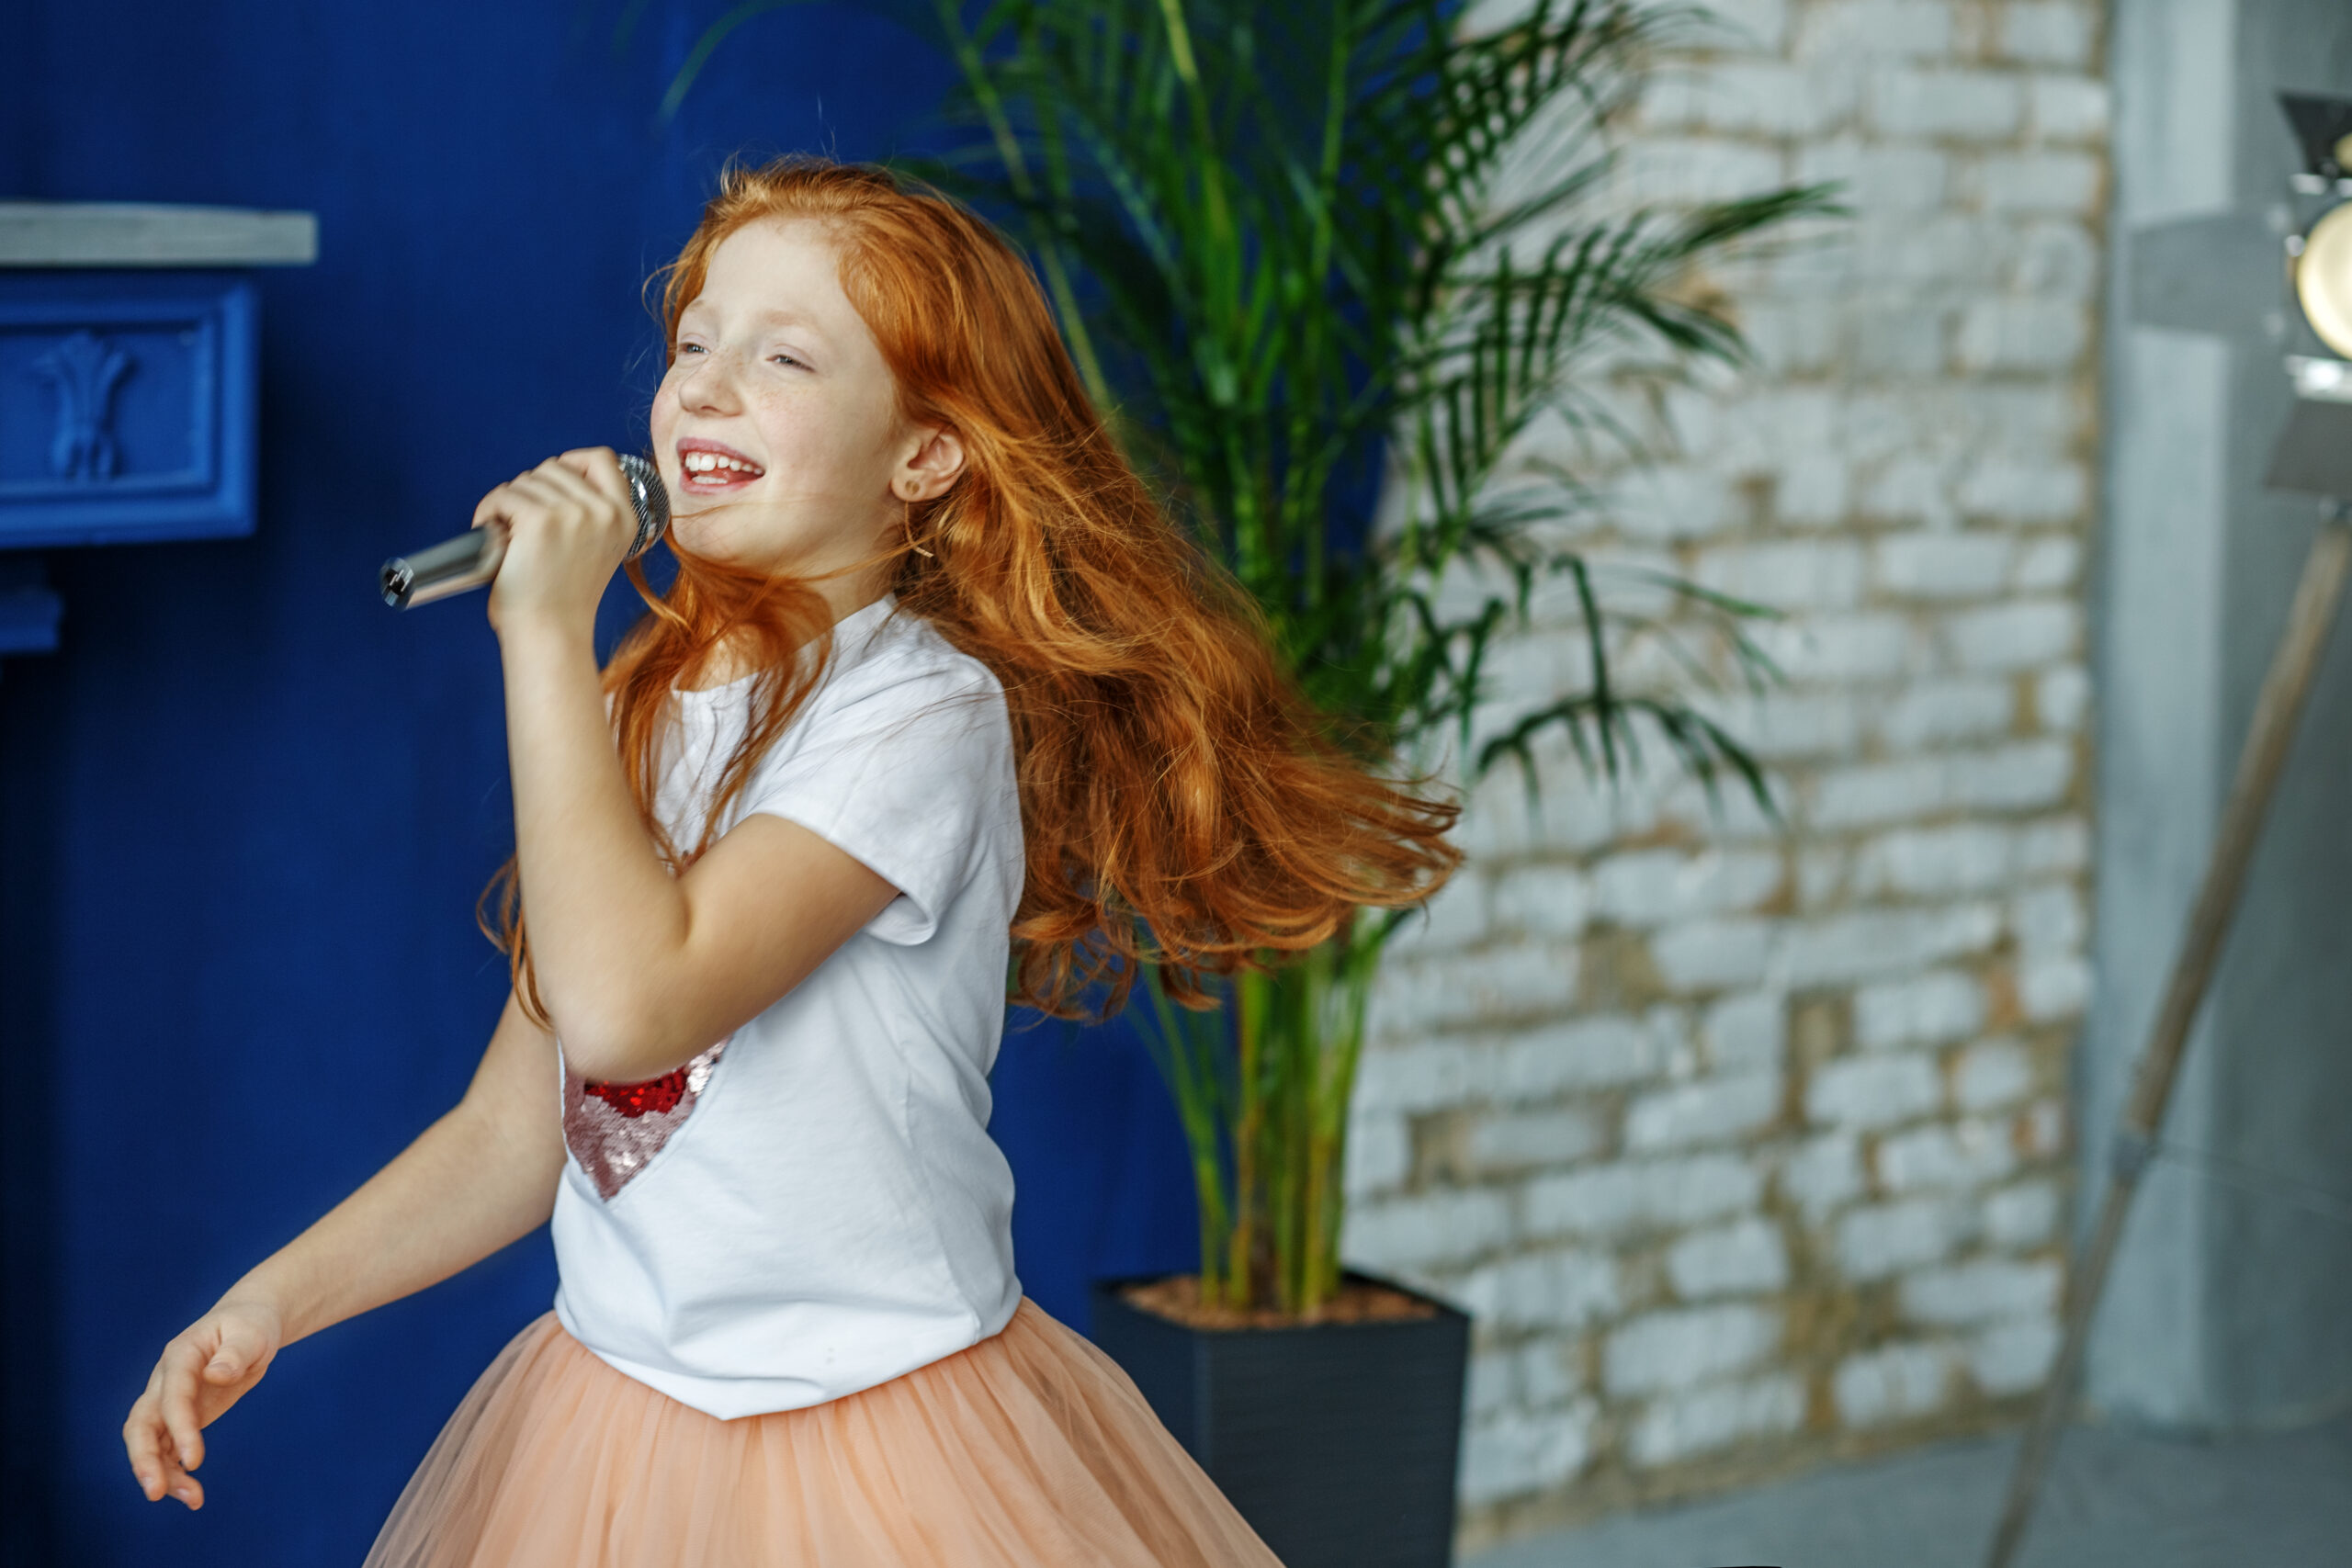 The child sings the song in the microphone.